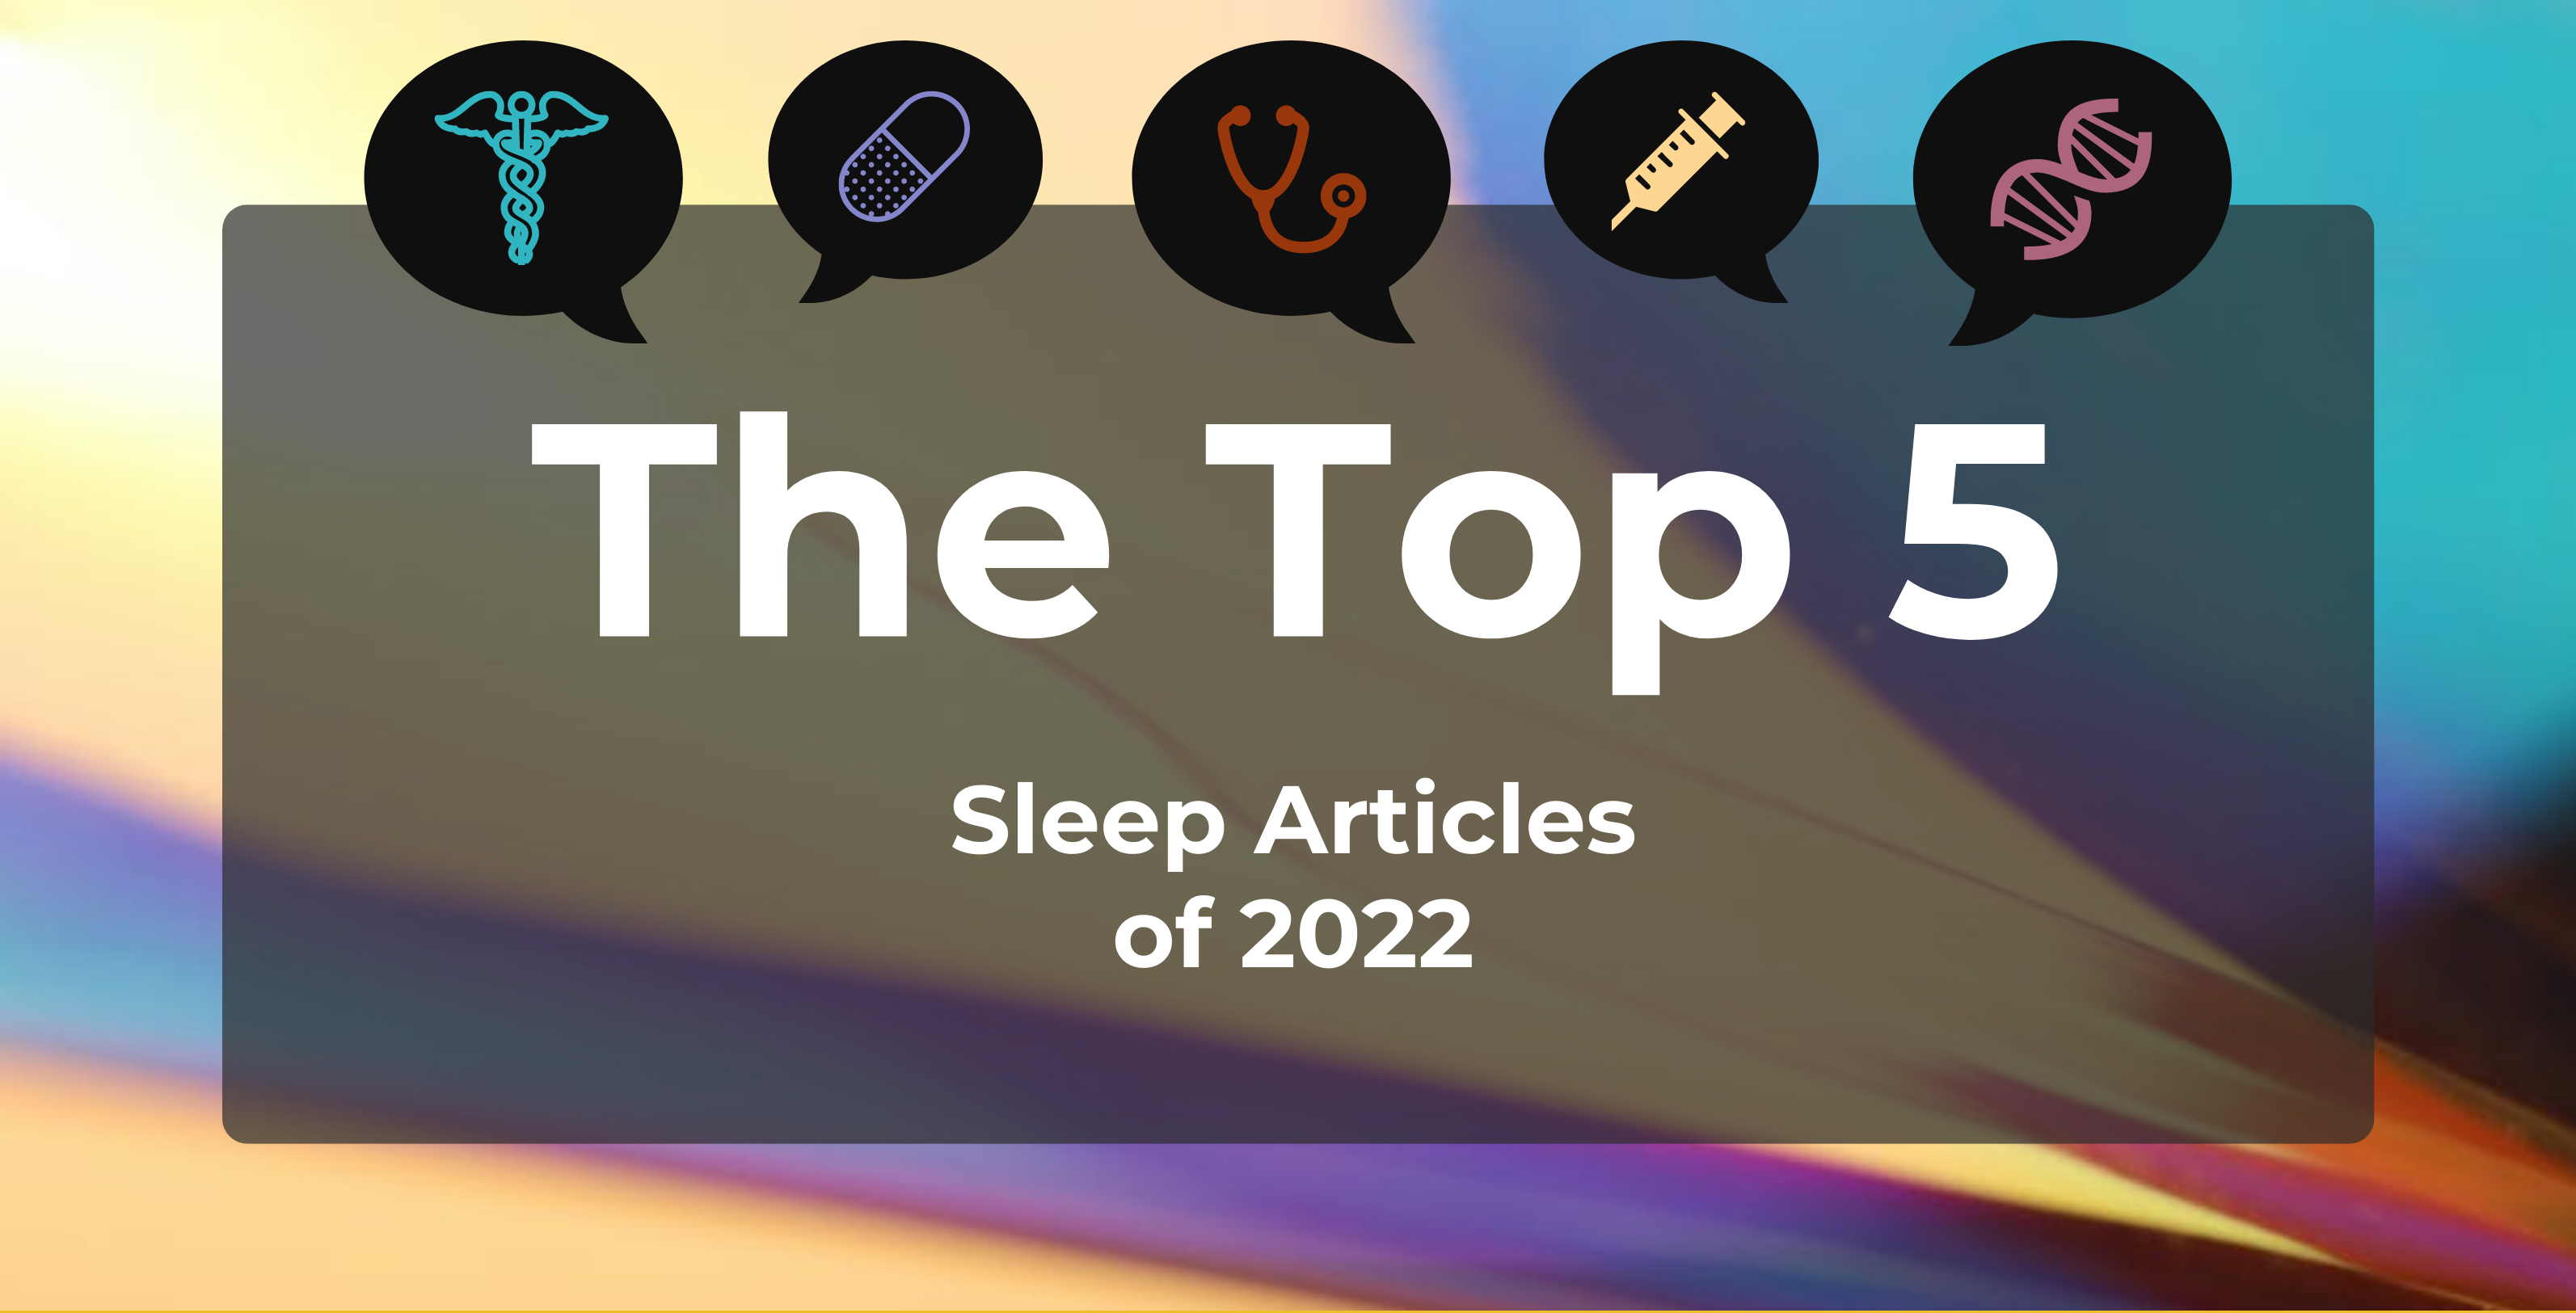 The Top 5 Sleep Articles of 2022